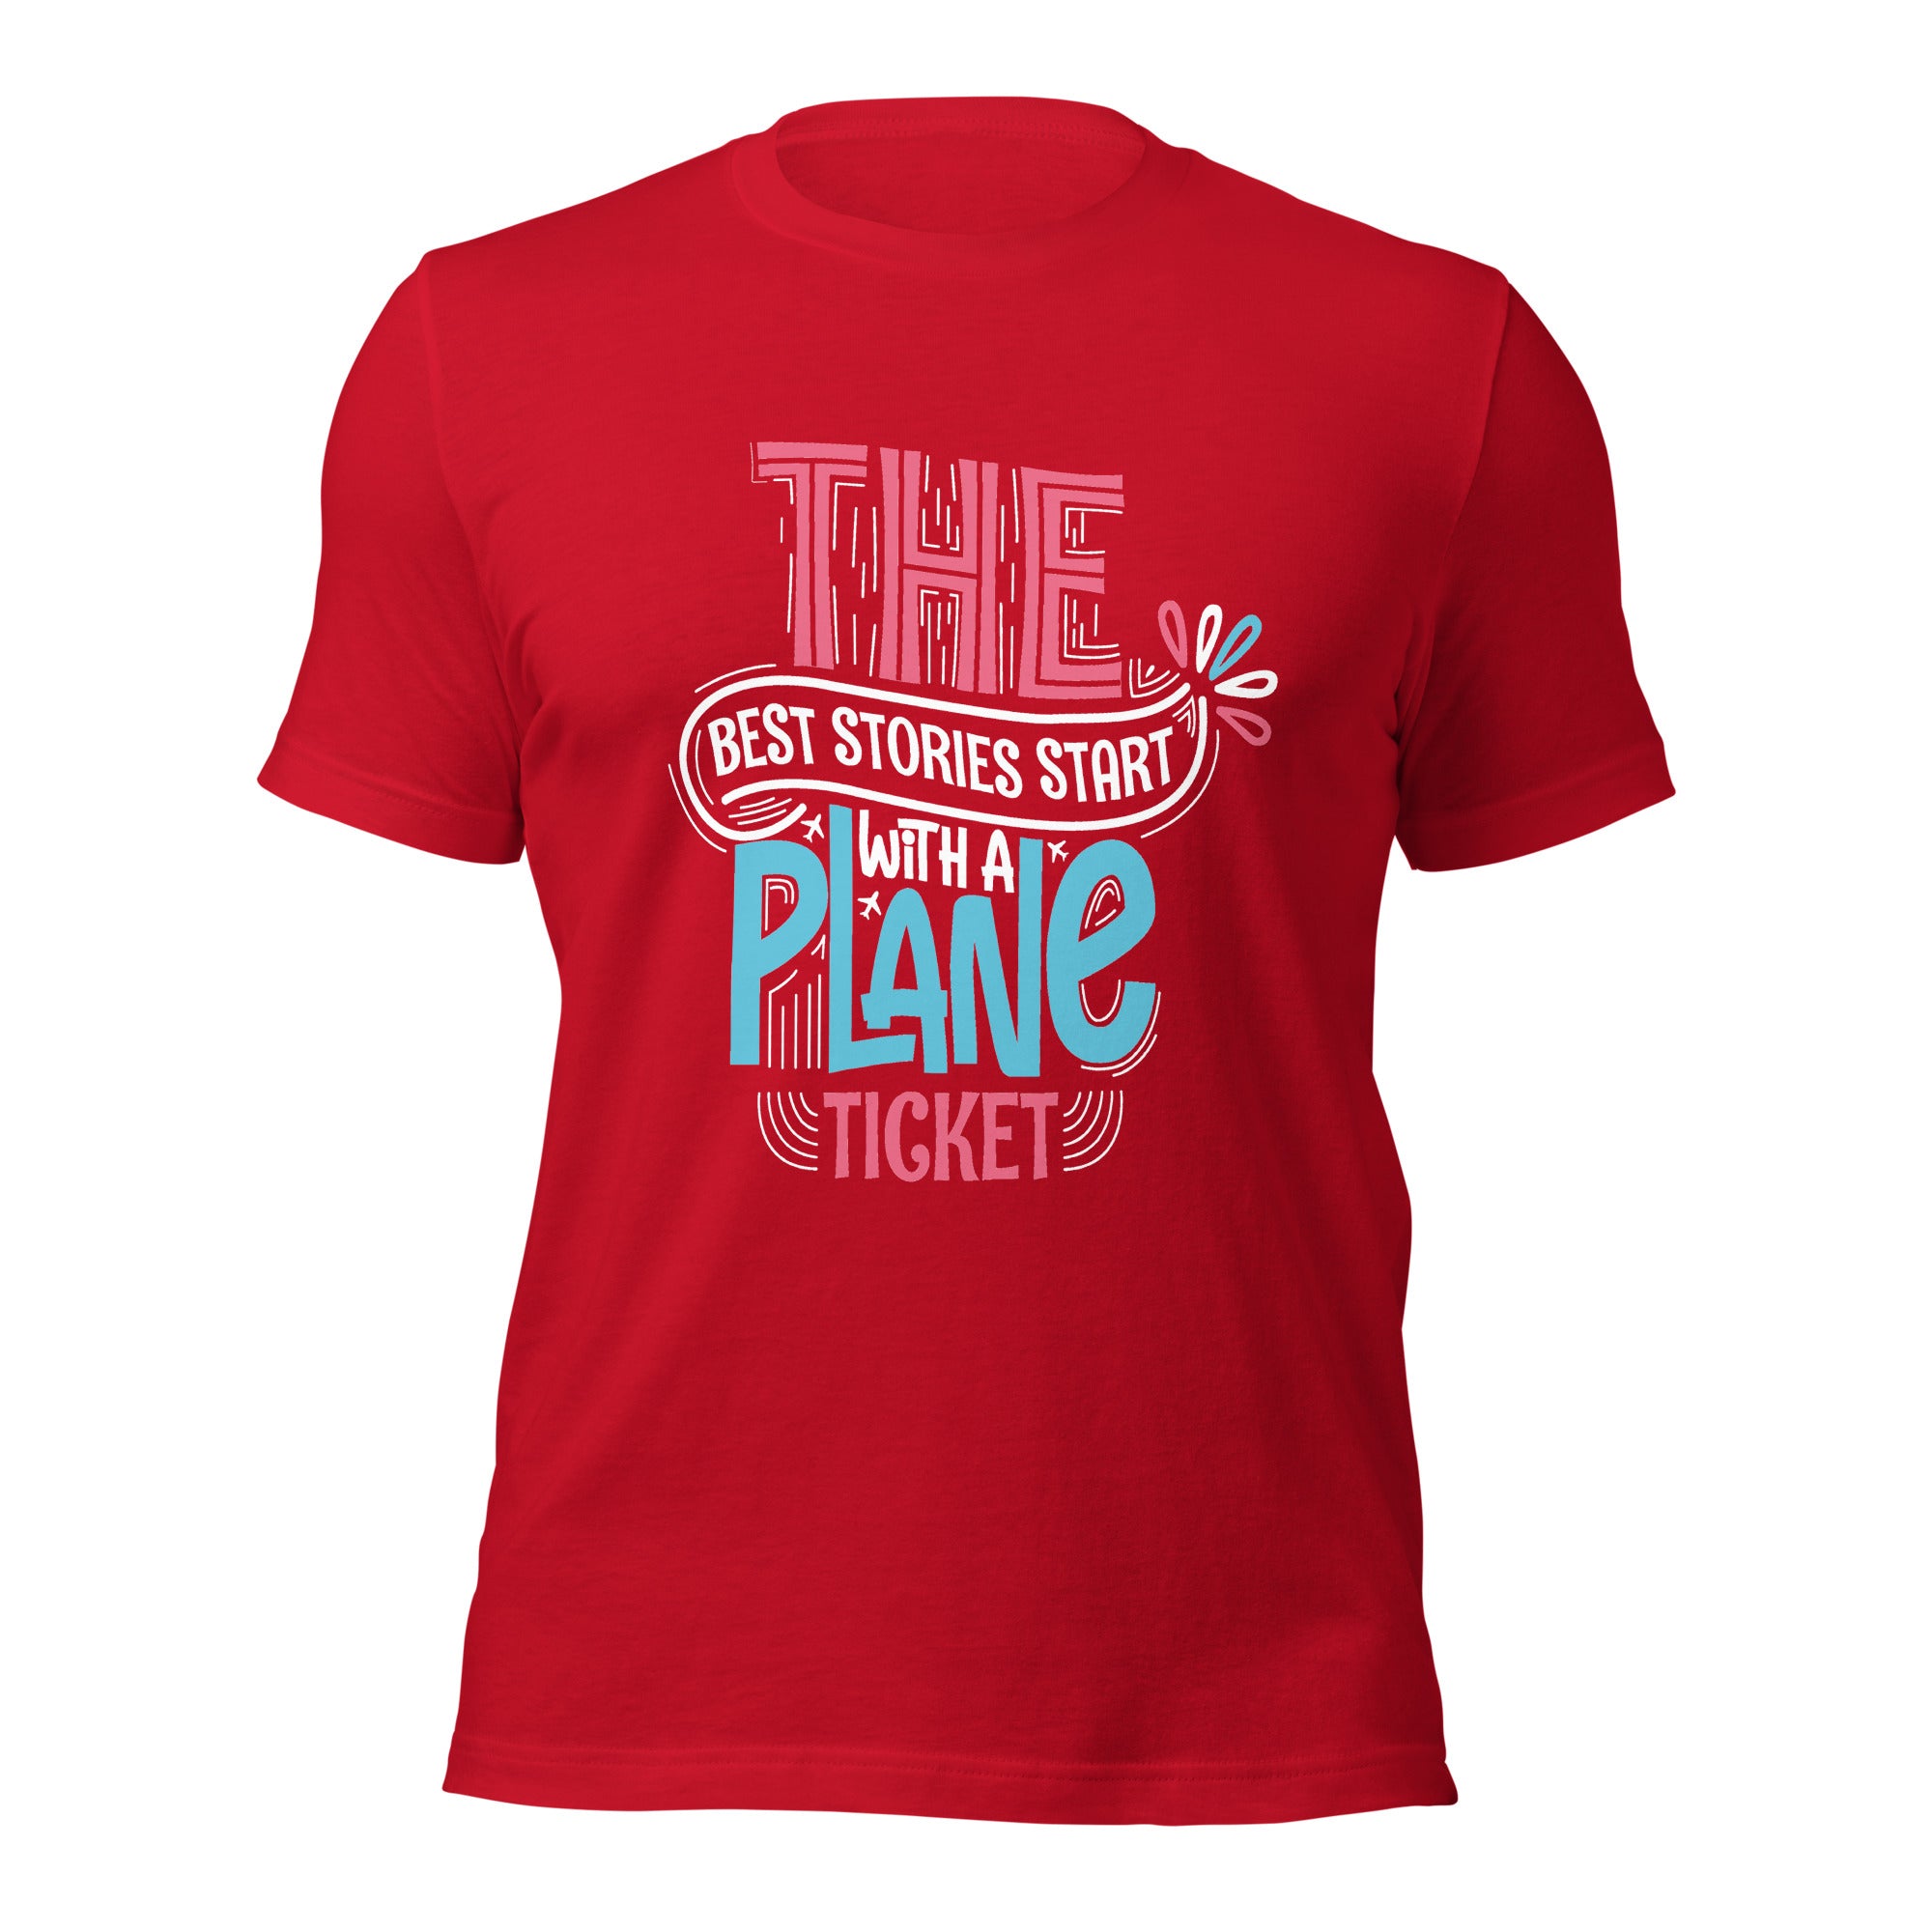 The Best Stories Start with a Plane Ticket T-Shirt